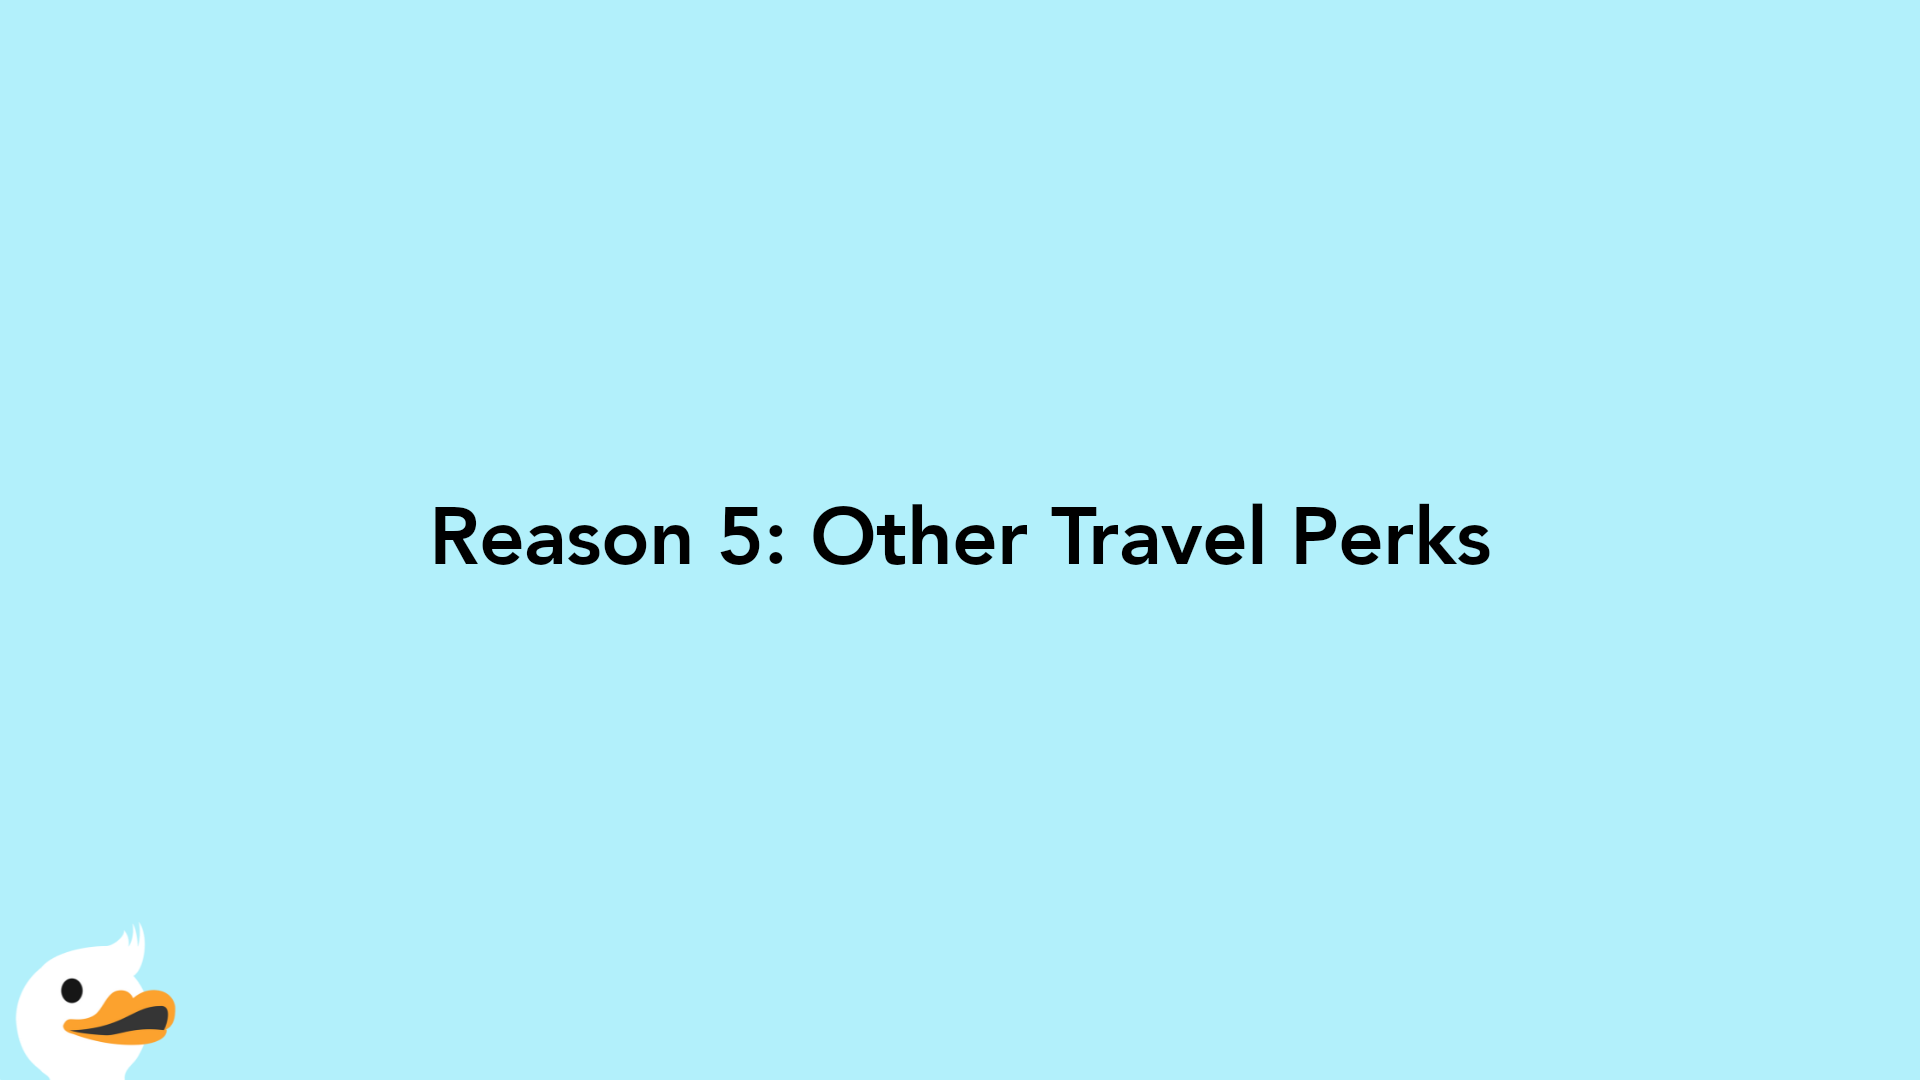 Reason 5: Other Travel Perks